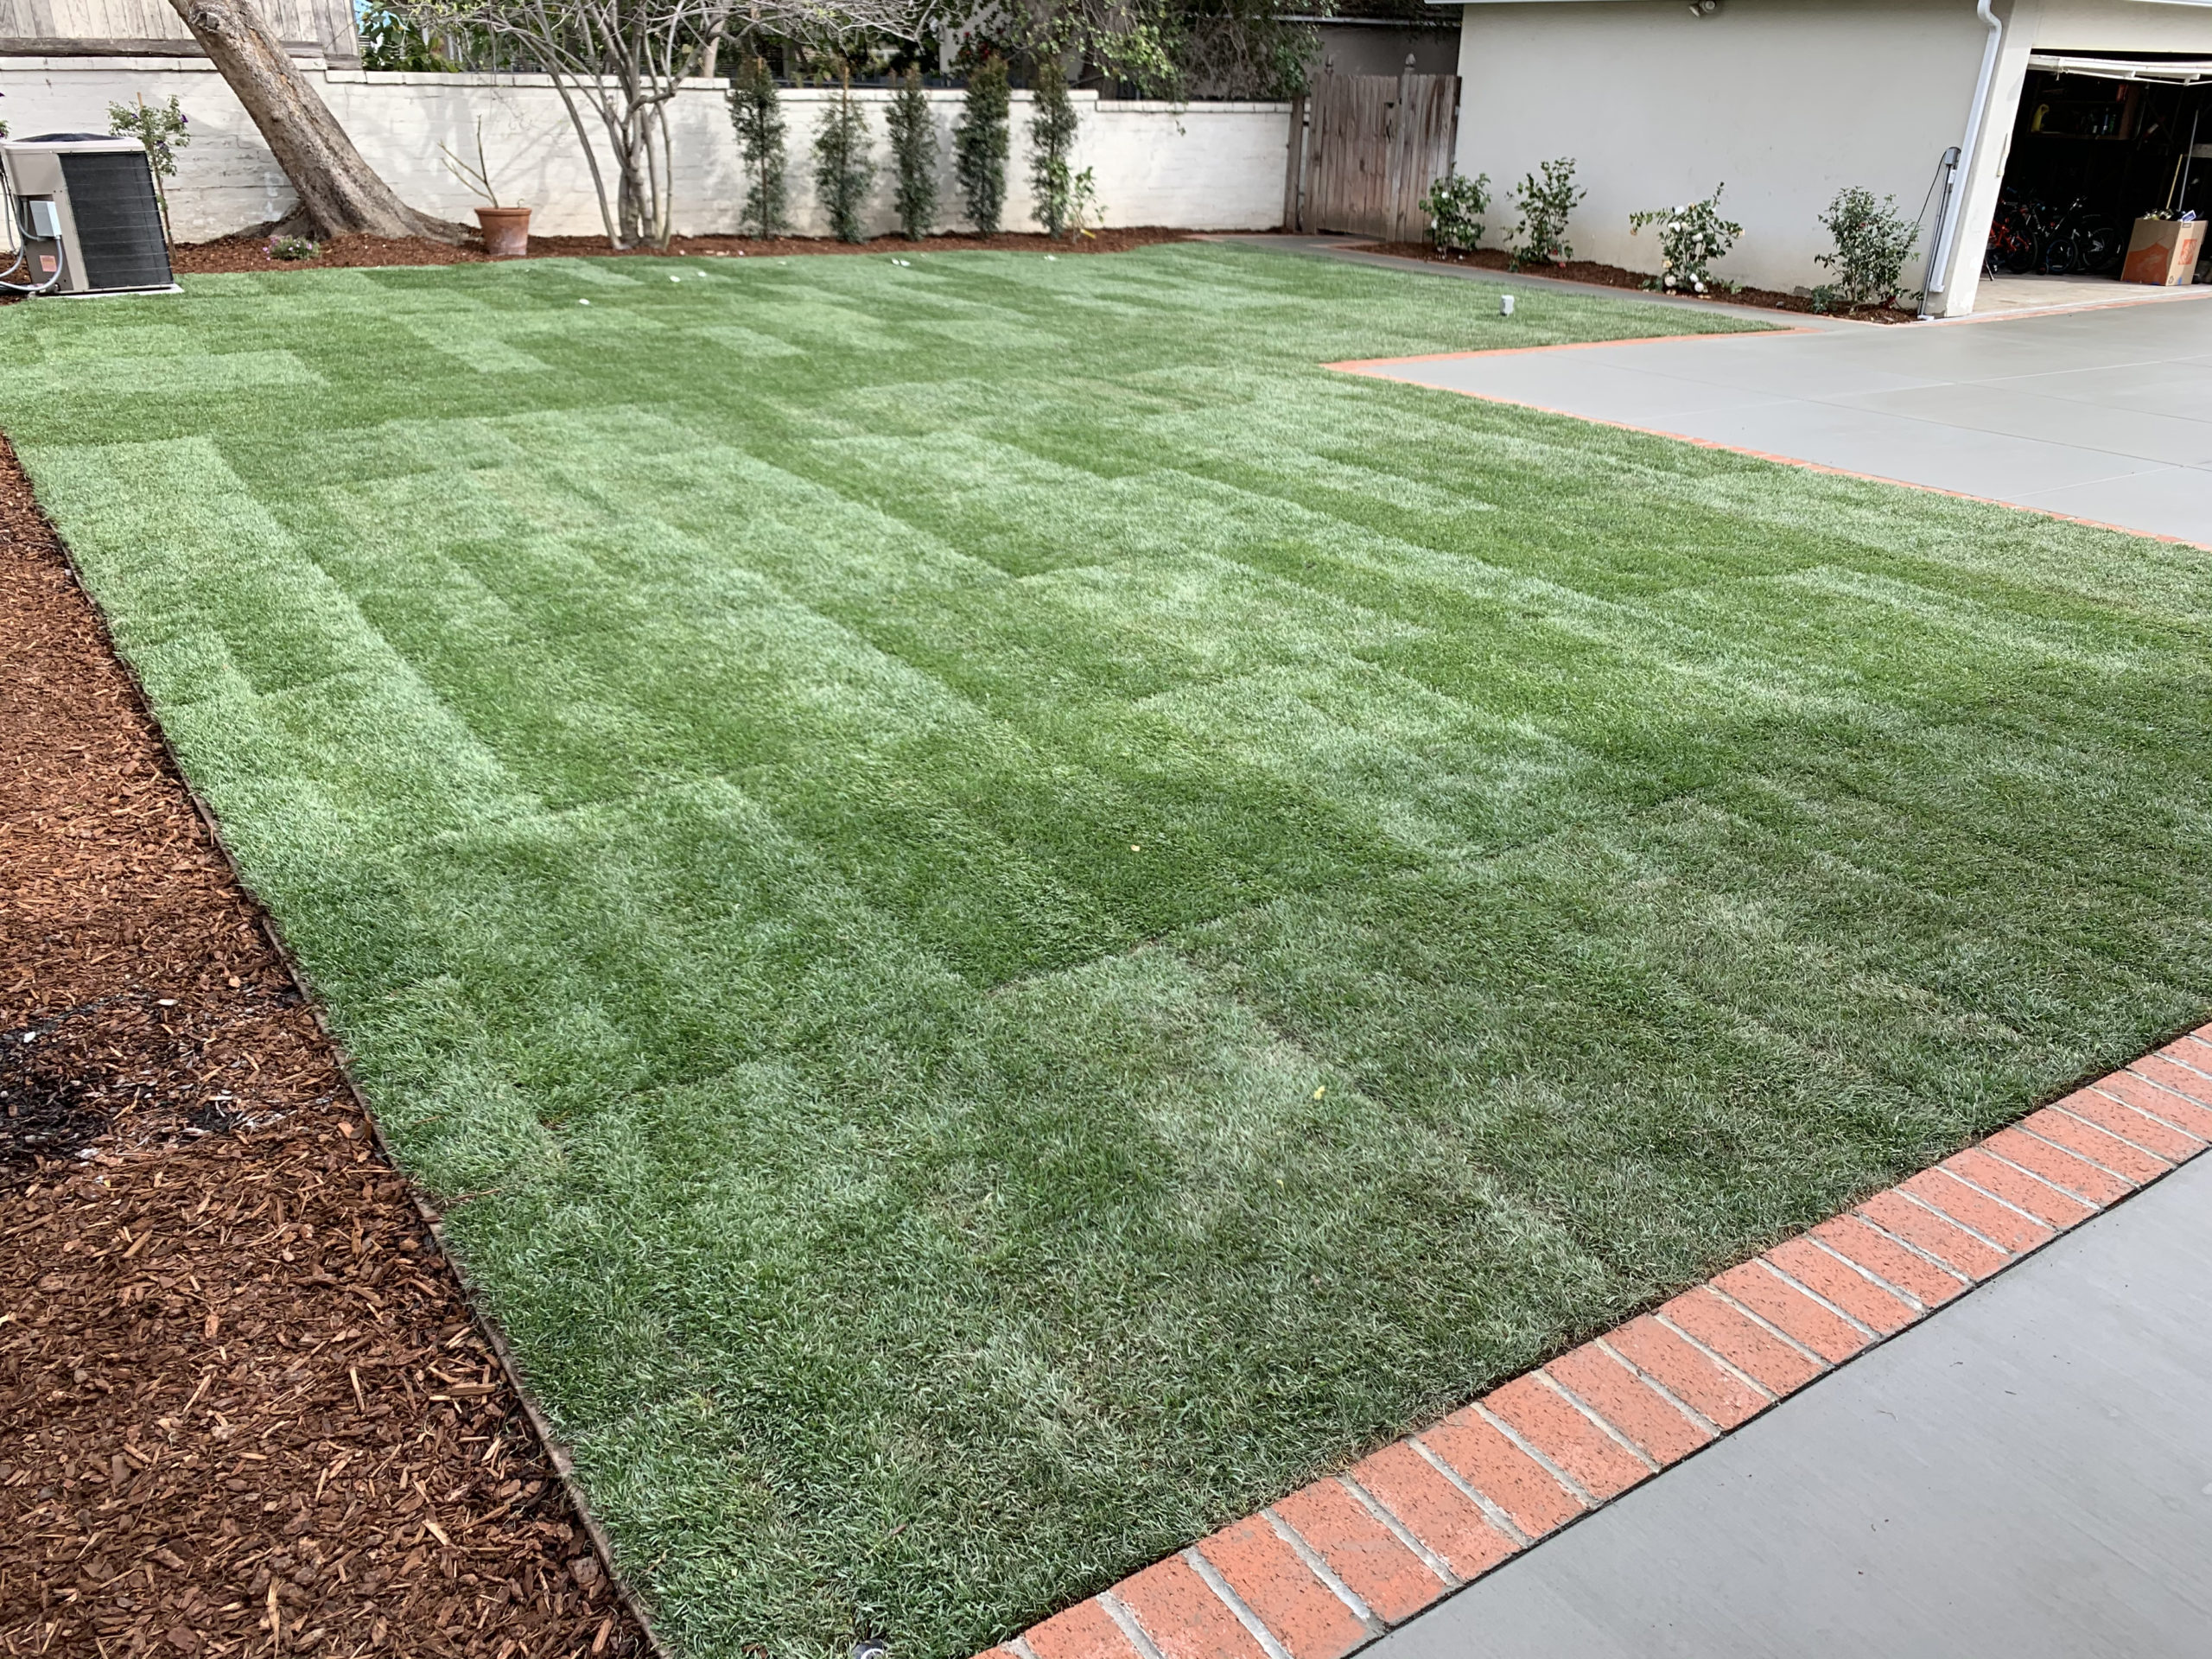 Sod-and-cement-patio-with brick trim by Eds Landscaping